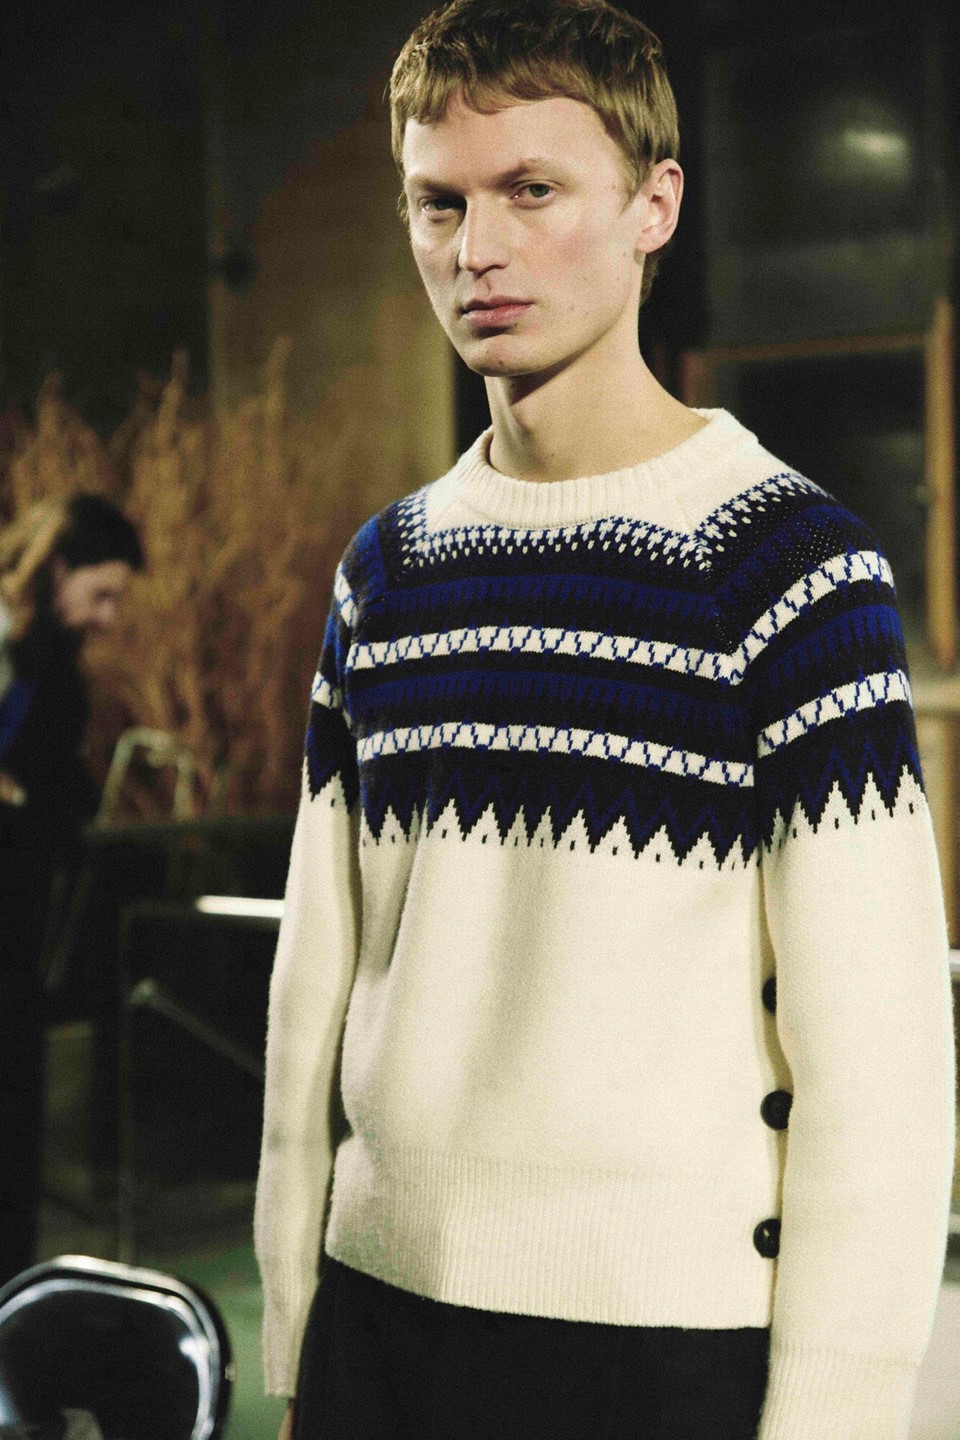 A/W24 The From Paris Shows | Men\'s AnOther Standout Fashion Week